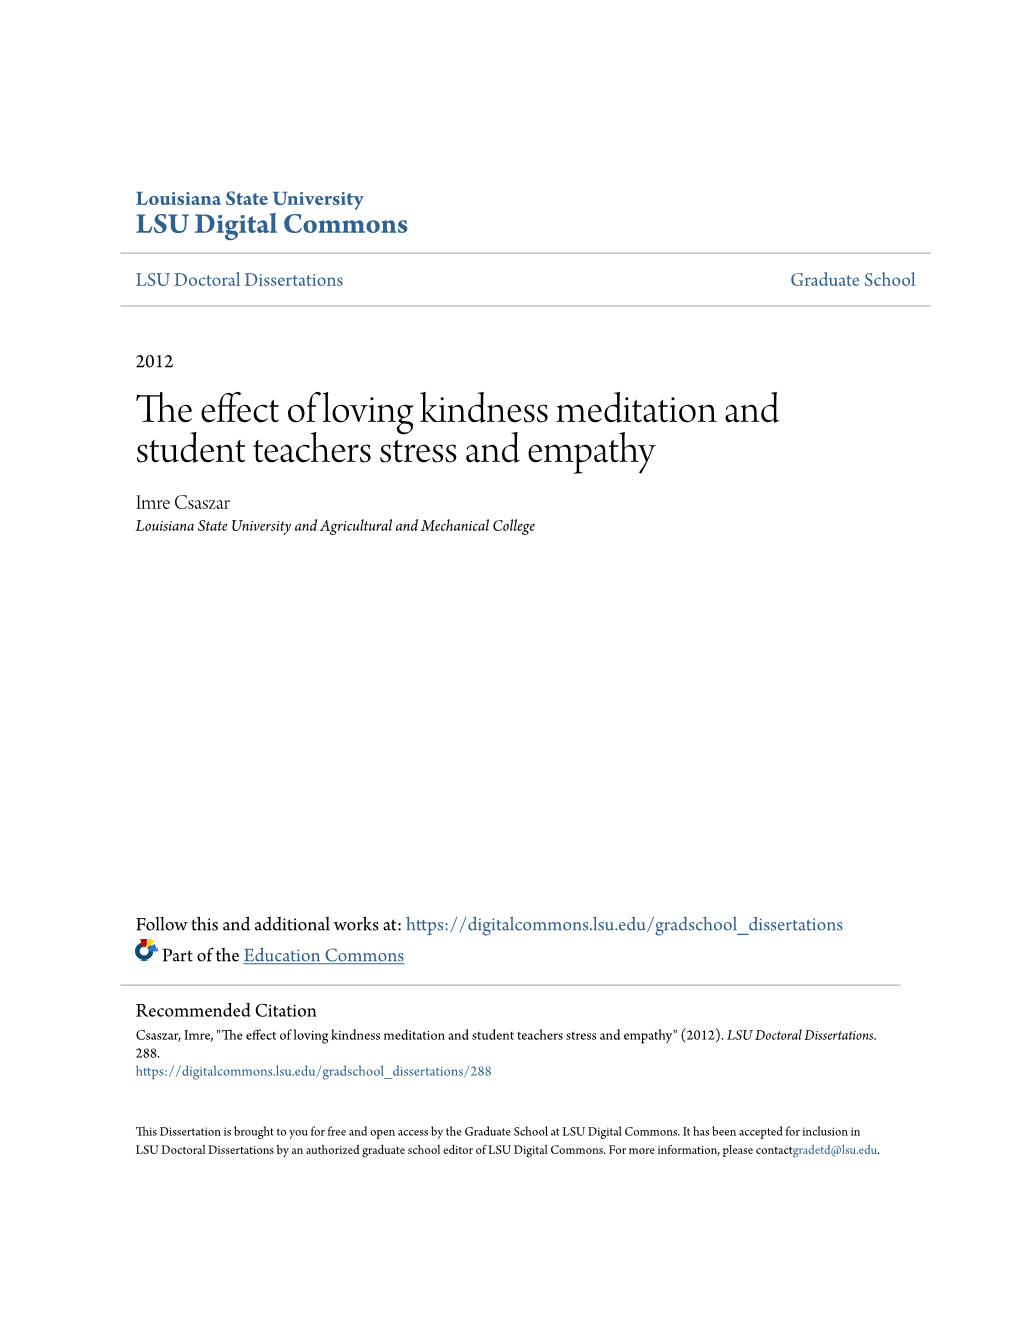 The Effect of Loving Kindness Meditation and Student Teachers Stress and Empathy Imre Csaszar Louisiana State University and Agricultural and Mechanical College